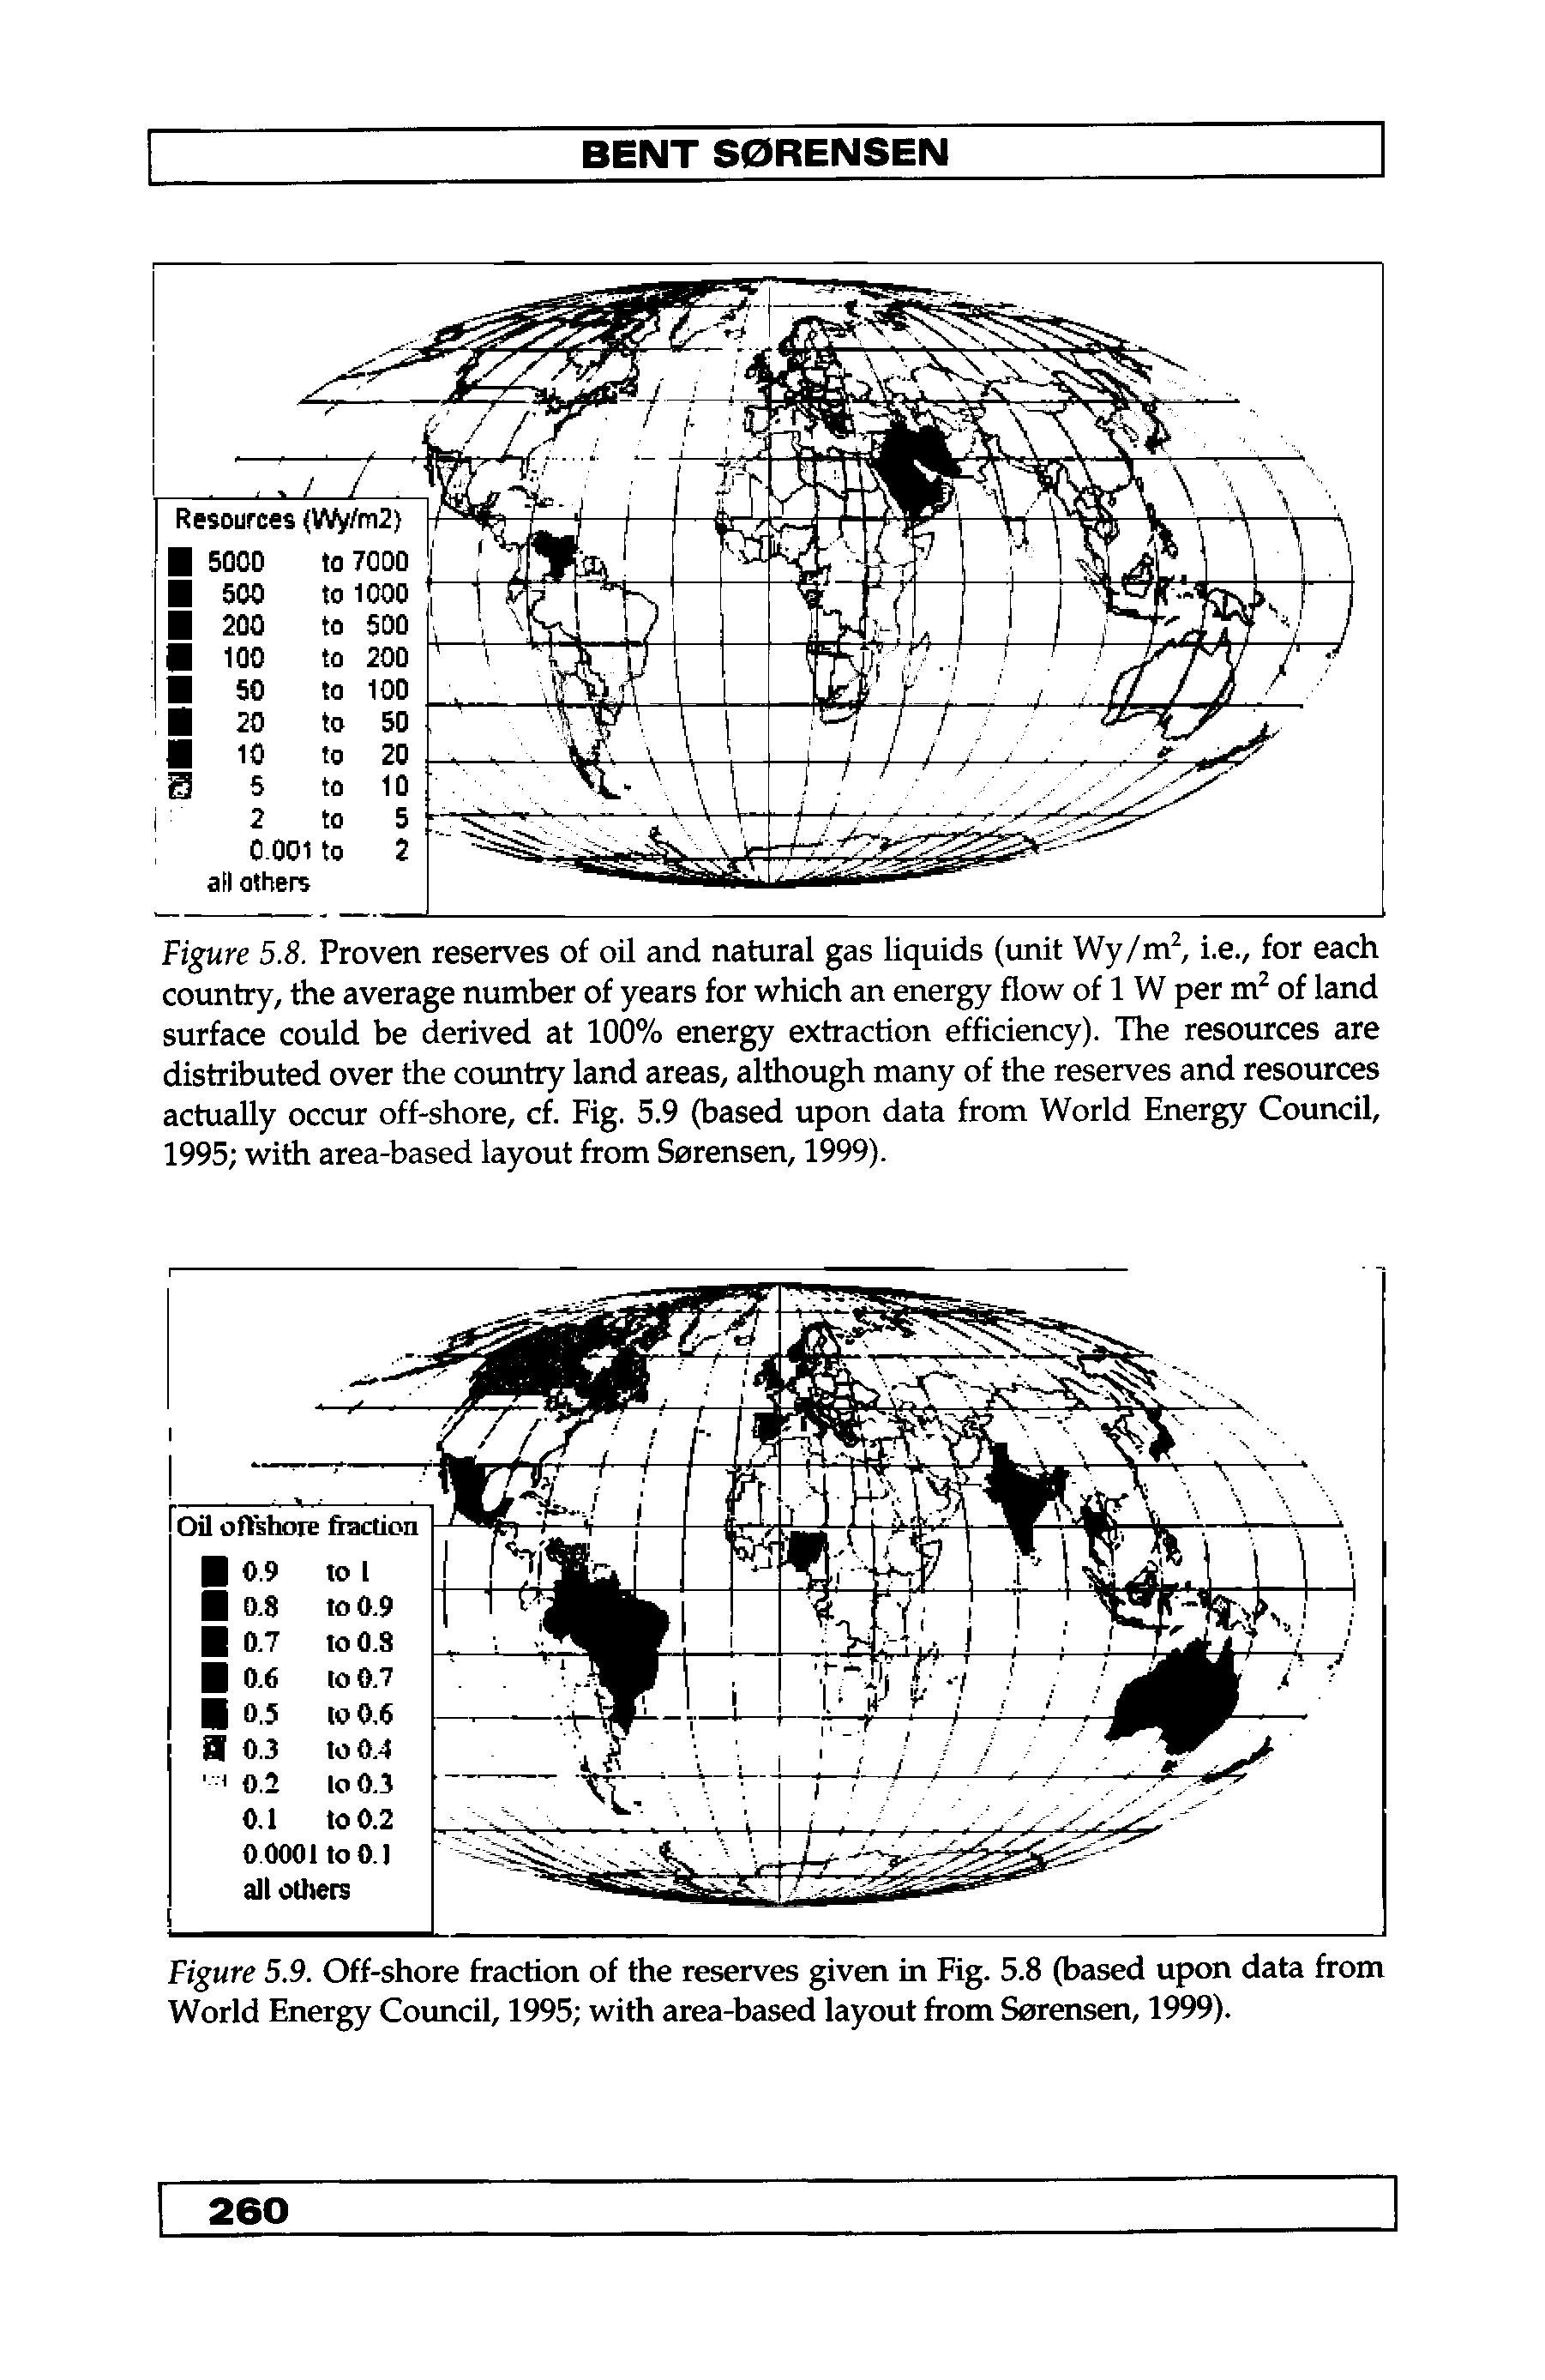 Figure 5.9. Off-shore fraction of the reserves given in Fig. 5.8 (based upon data from World Energy Council, 1995 with area-based layout from Sorensen, 1999).